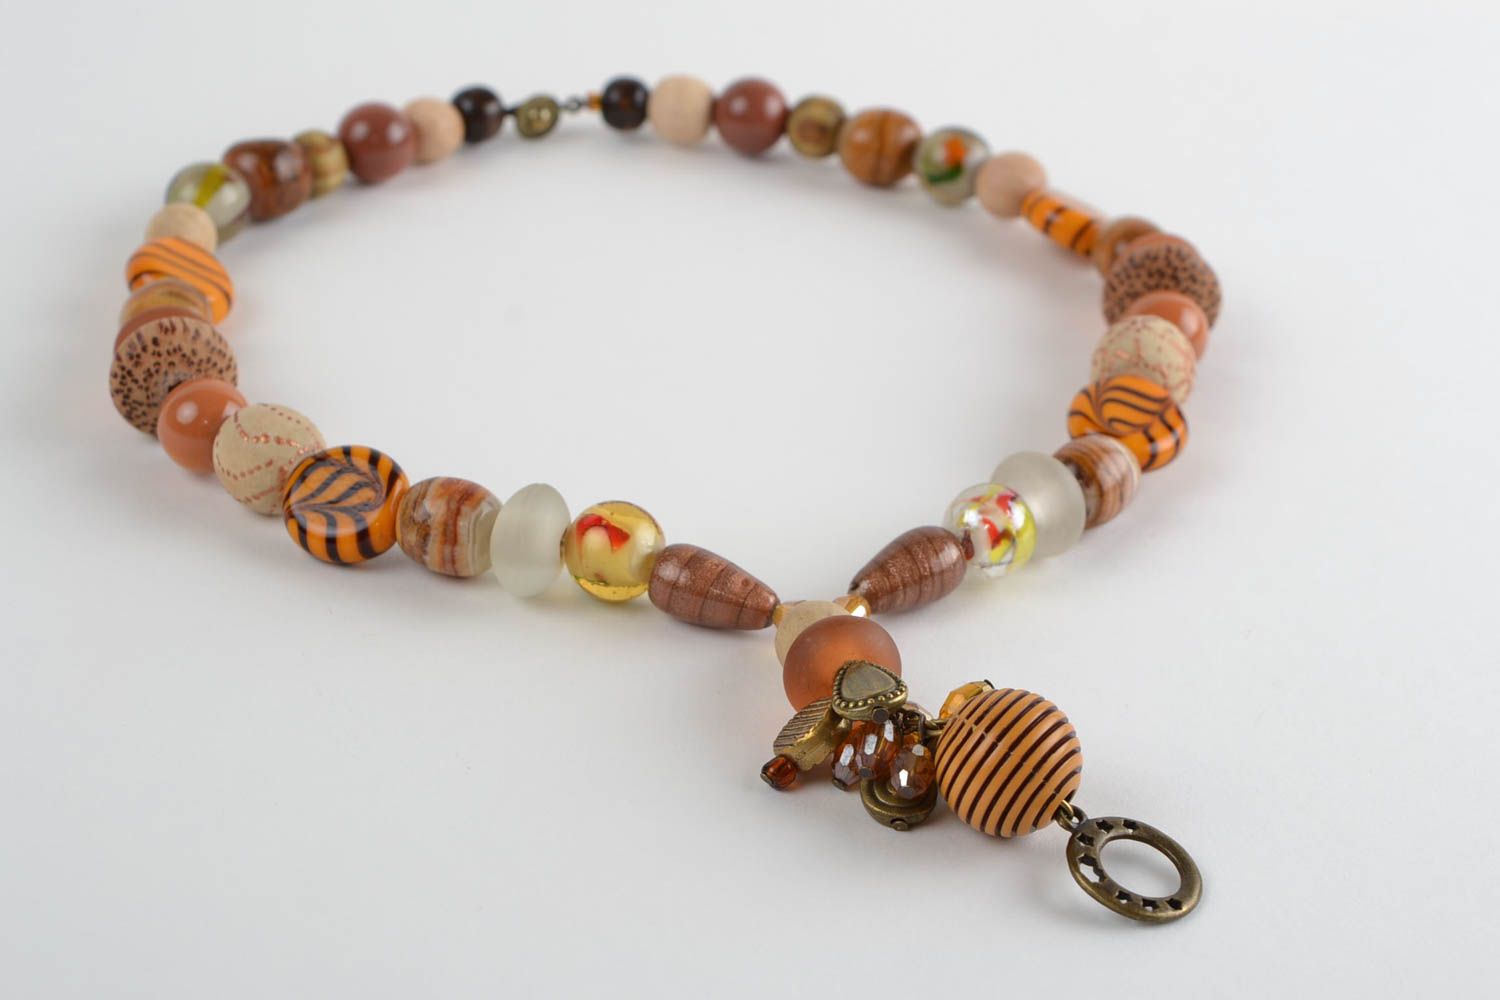 Handmade natural stone necklace with jadeite crystal and cork wood beads photo 4